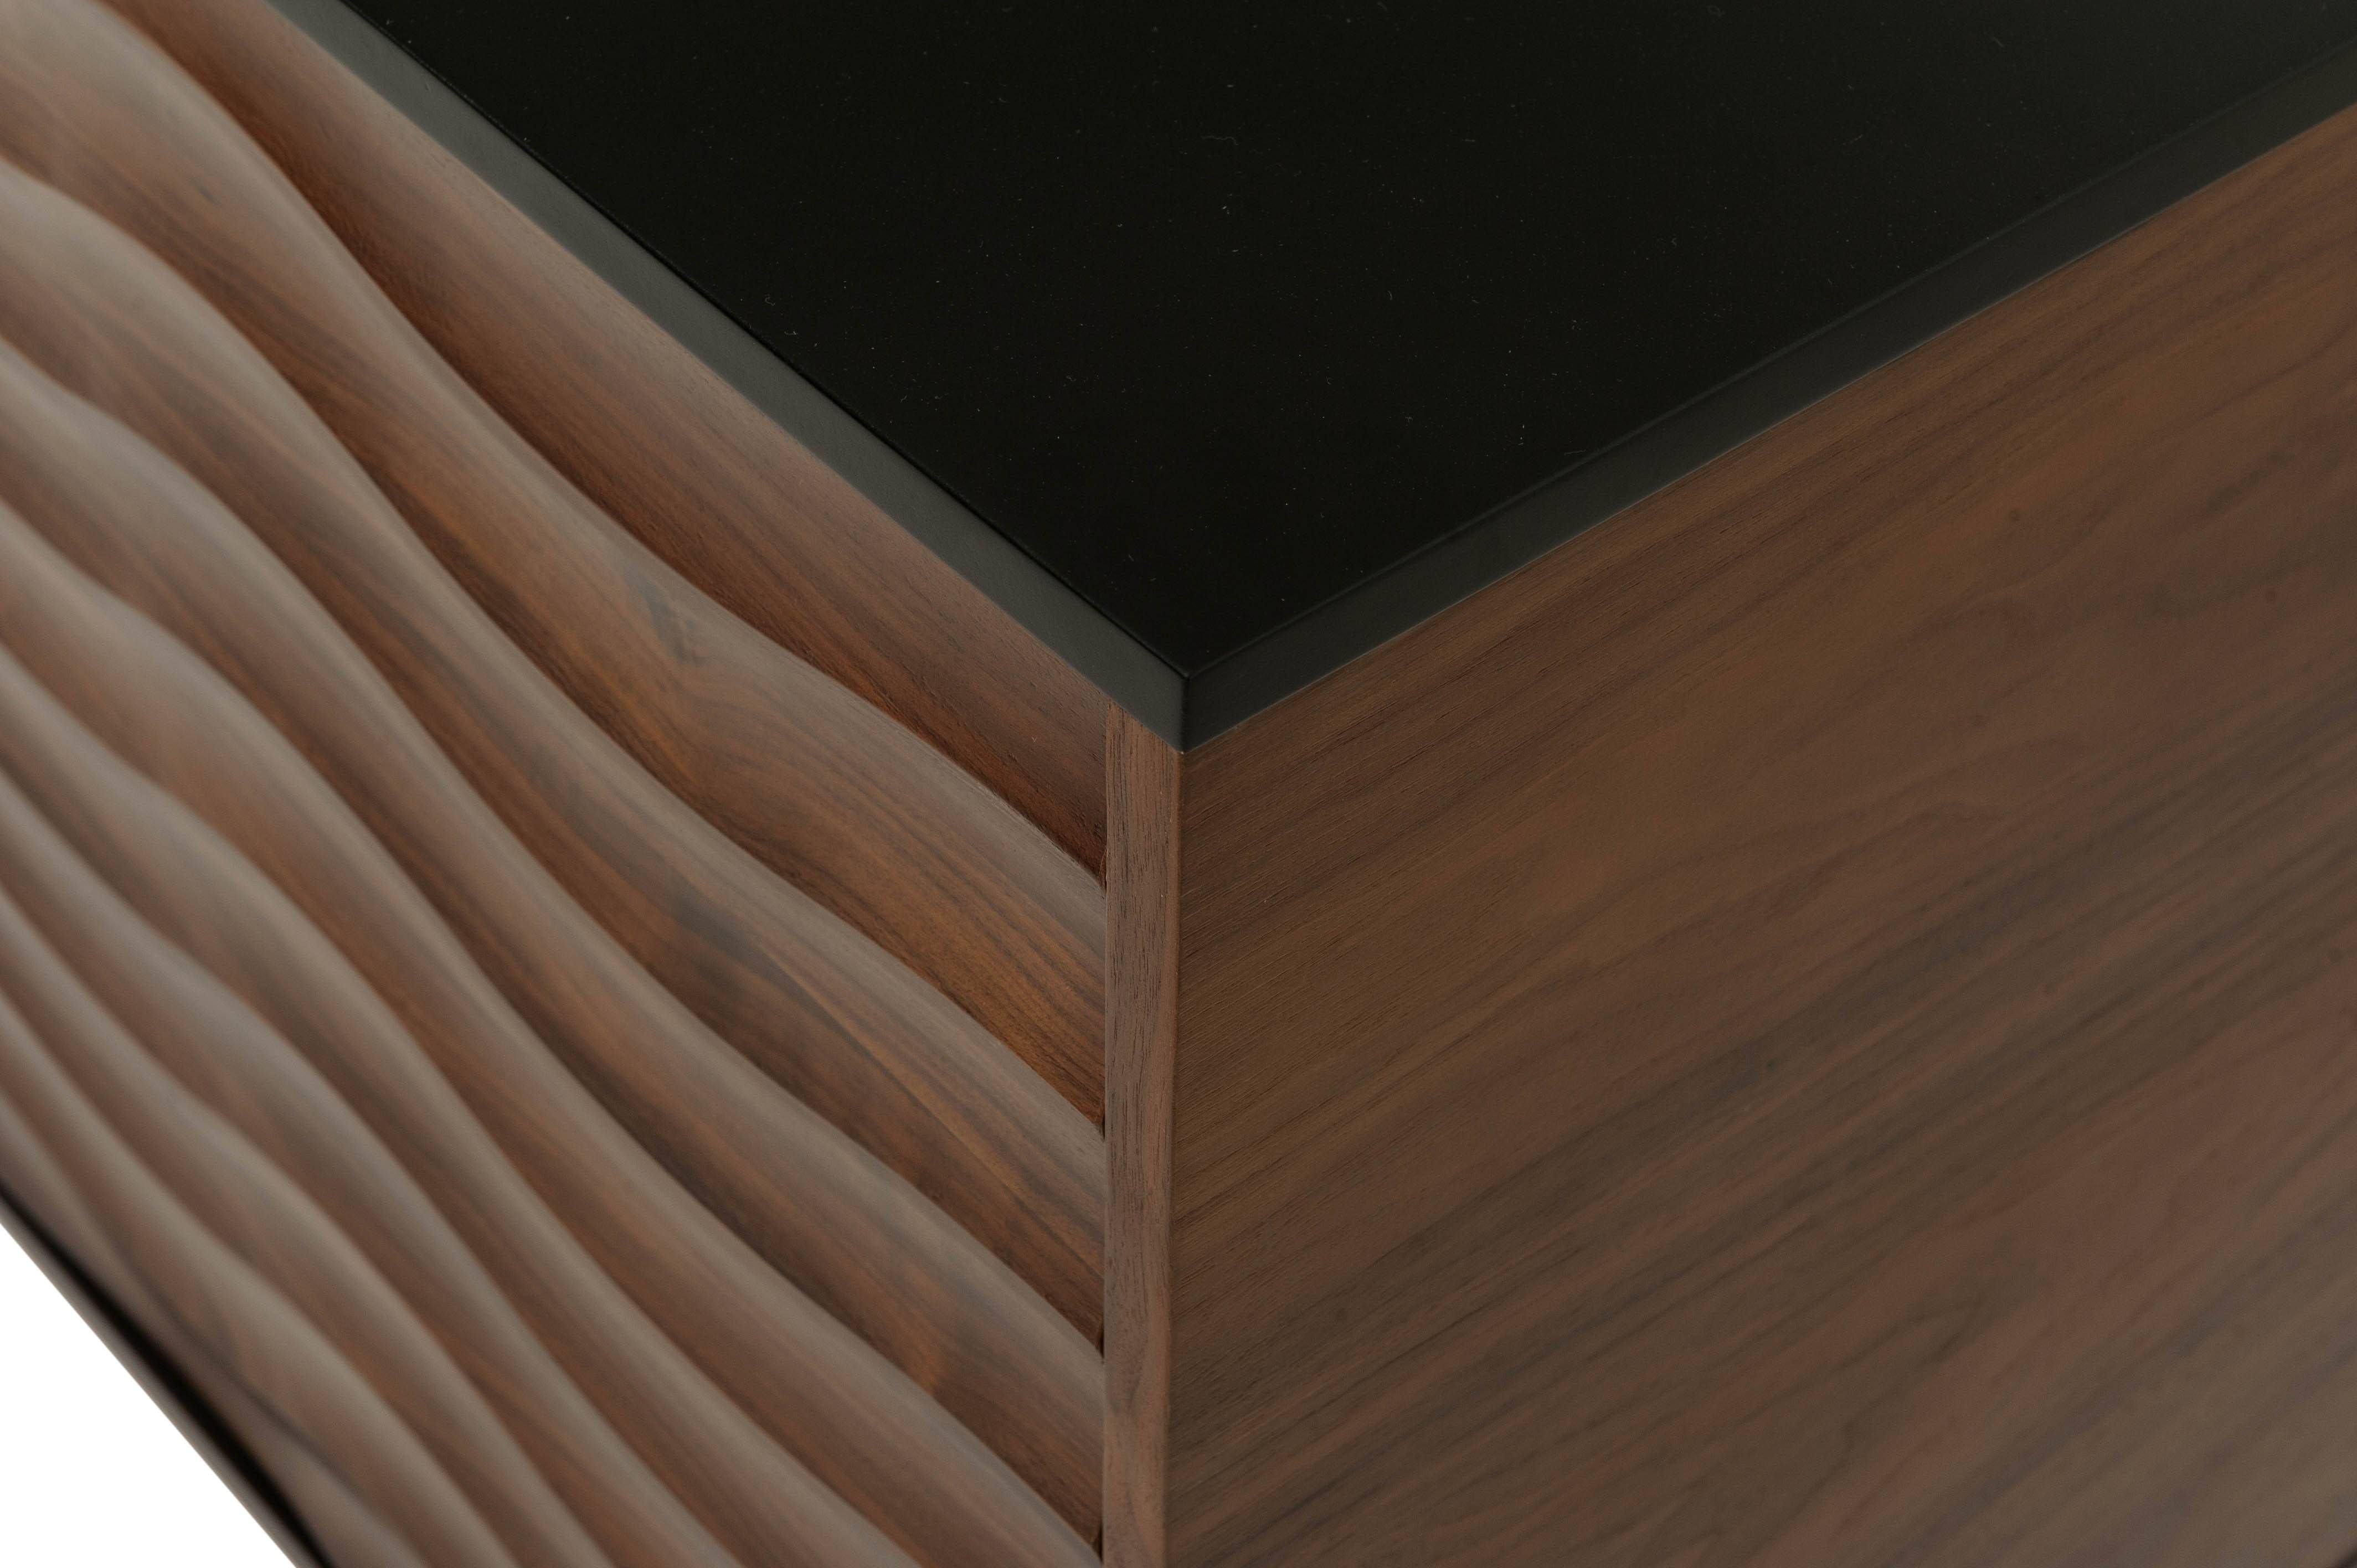 Swell Sideboard Cabinet In Walnut And Blacknuevo | Hgpm103 Throughout Walnut And Black Sideboards (Photo 27 of 30)